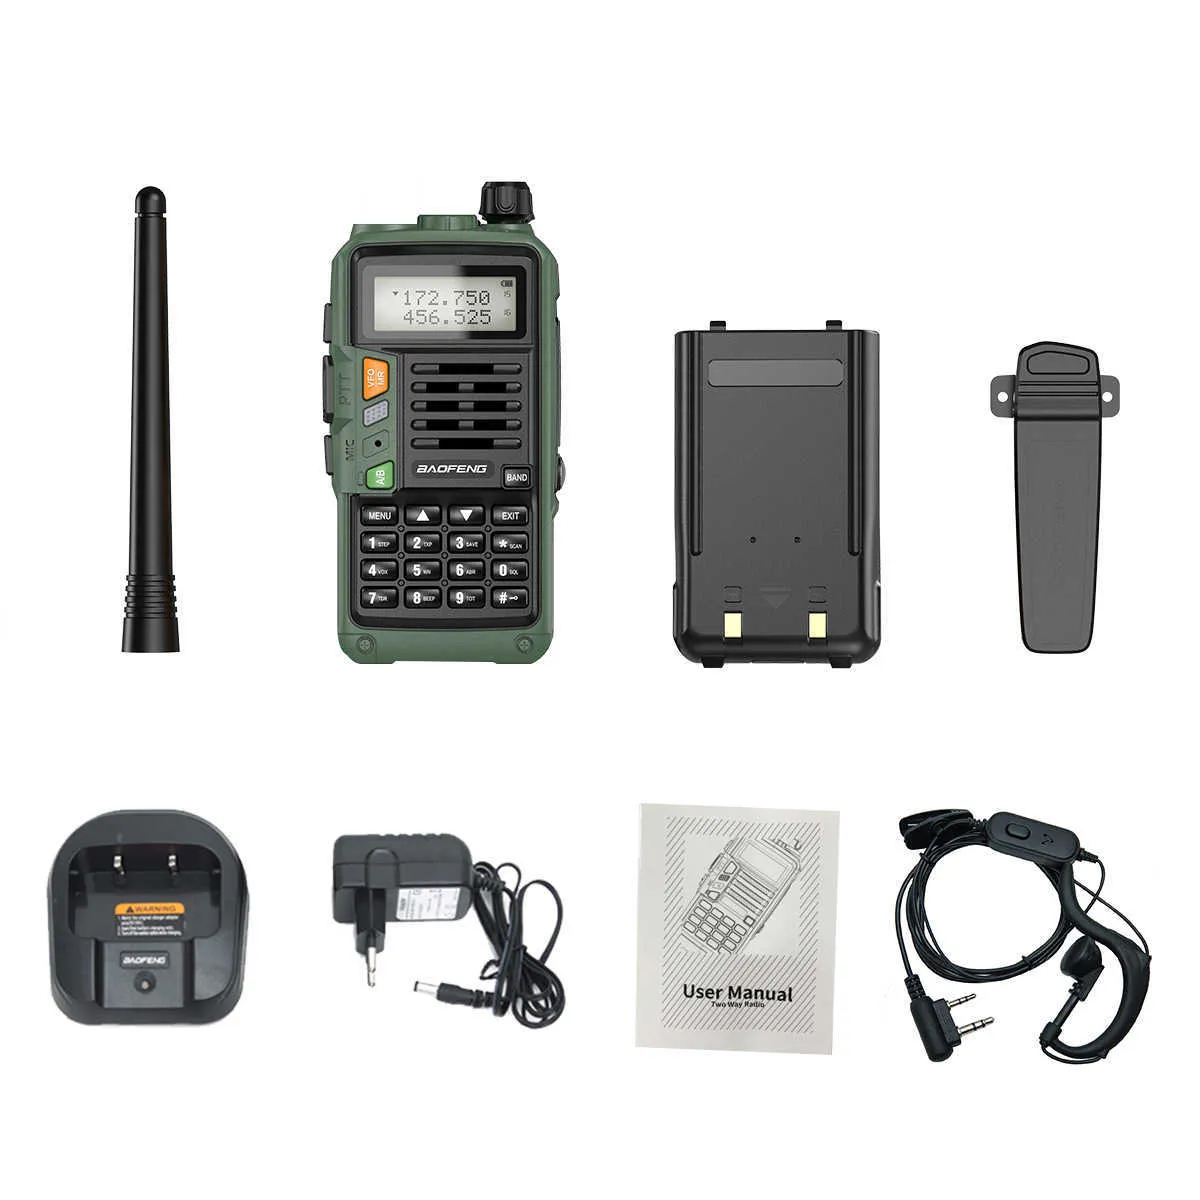 BaoFeng UVS9 Plus Powerful Walkie Talkie CB Radio Transceiver 10W 50 KM Long Range Portable For hunt forest upgrade 2108171275011